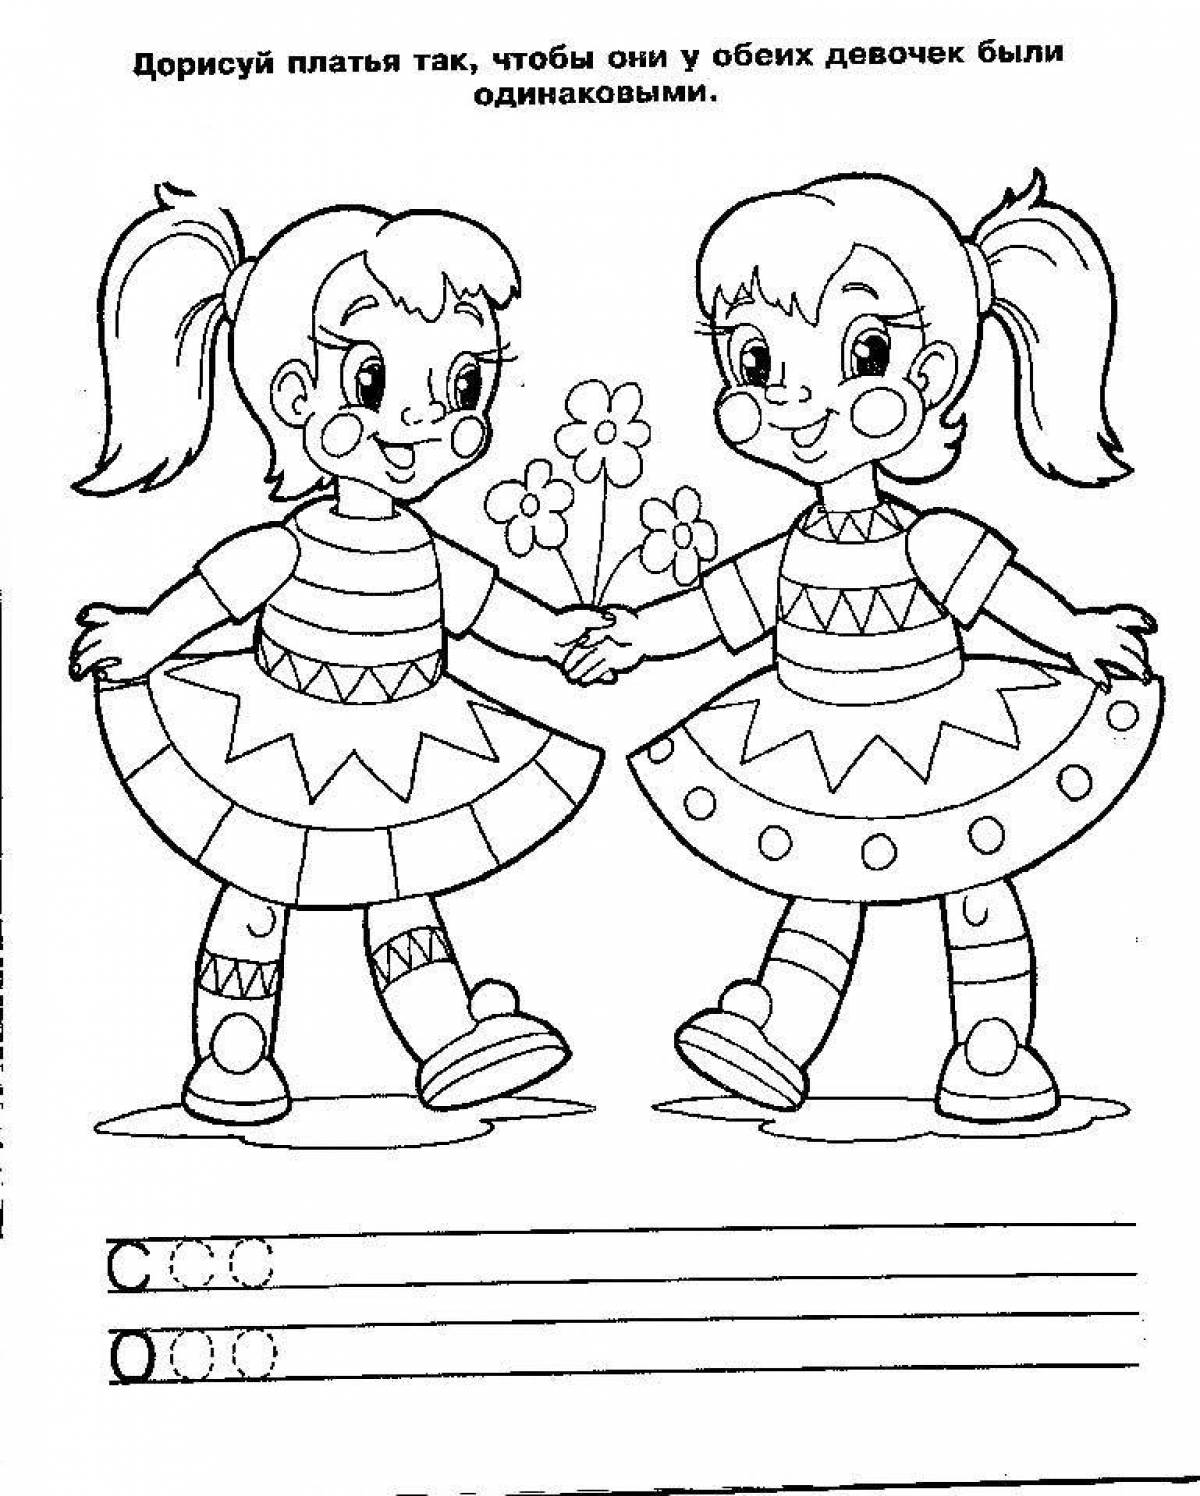 Entertaining coloring book for children